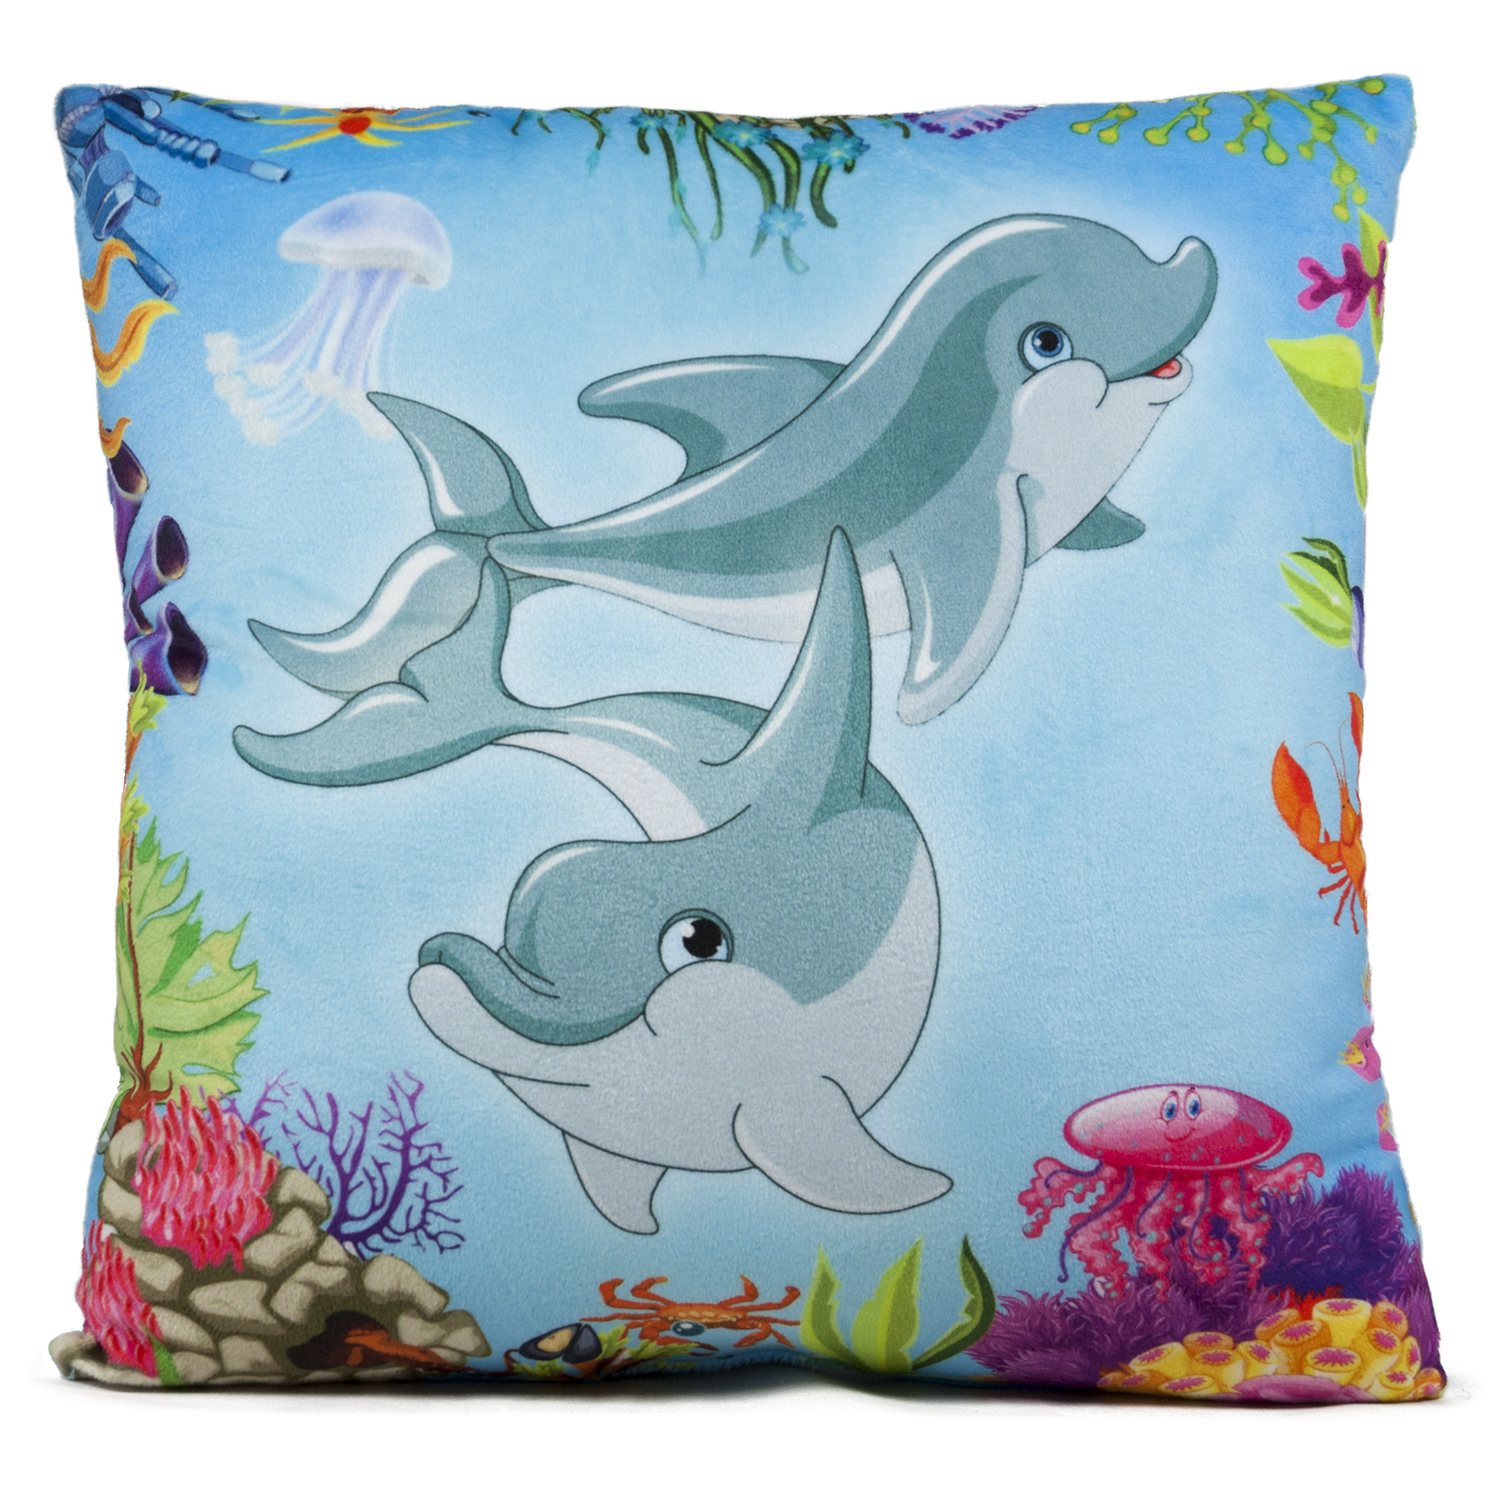 Pillow with dolphins